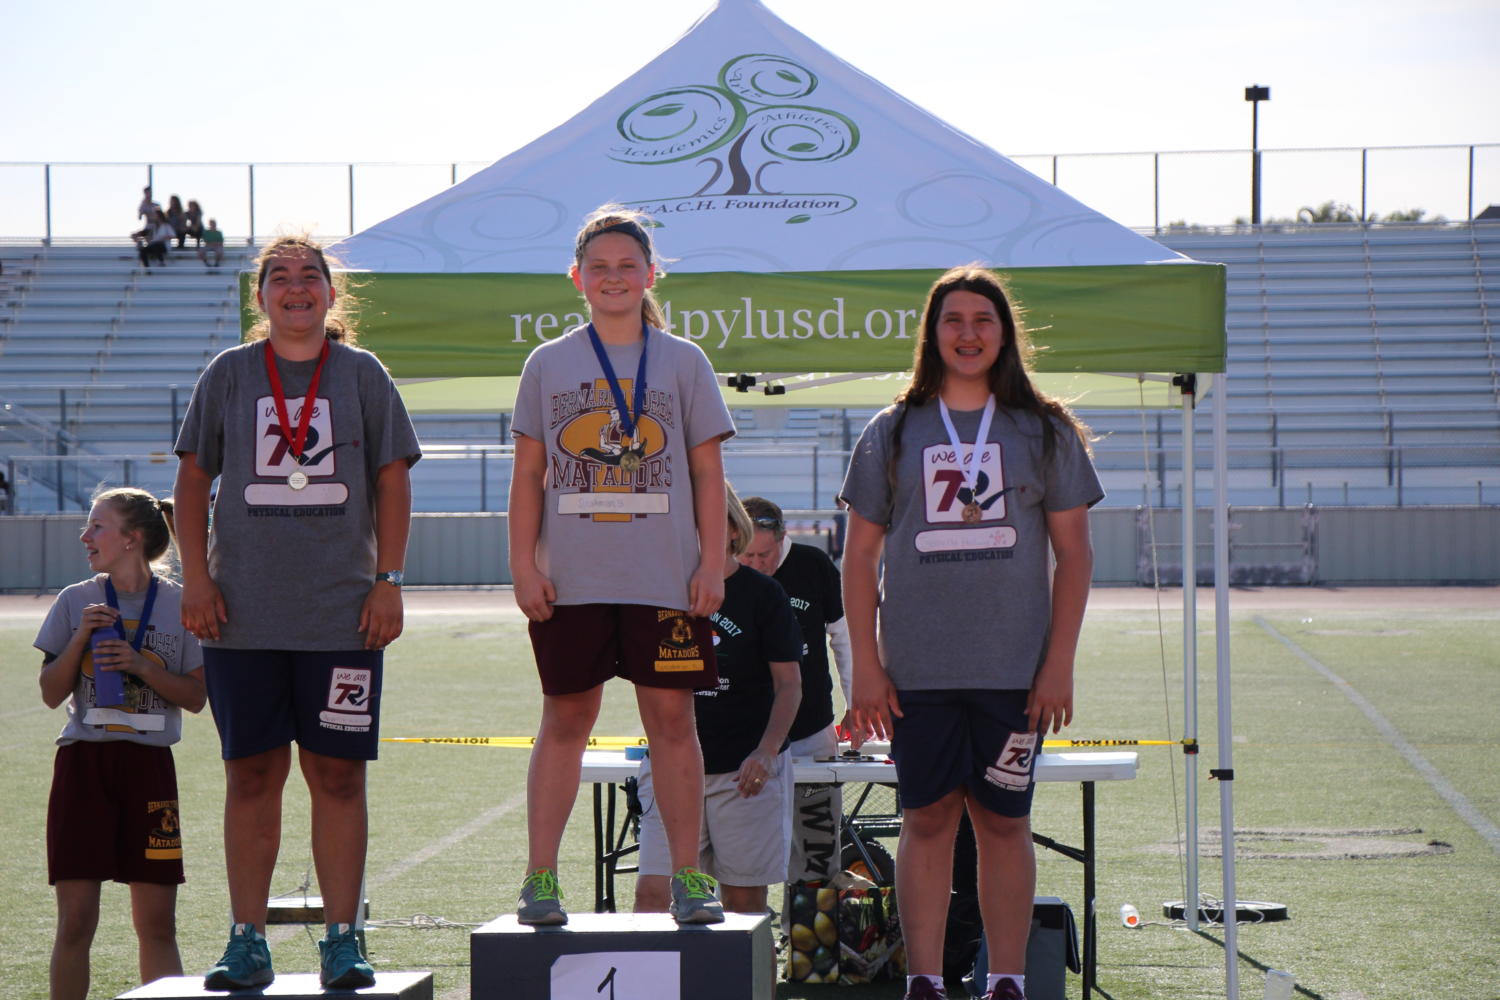 Angelina and Isabella Hellwig were just 2 of the many bright spots at this years track event, placing 2nd and 3rd respectively in the 7th grade shot put.